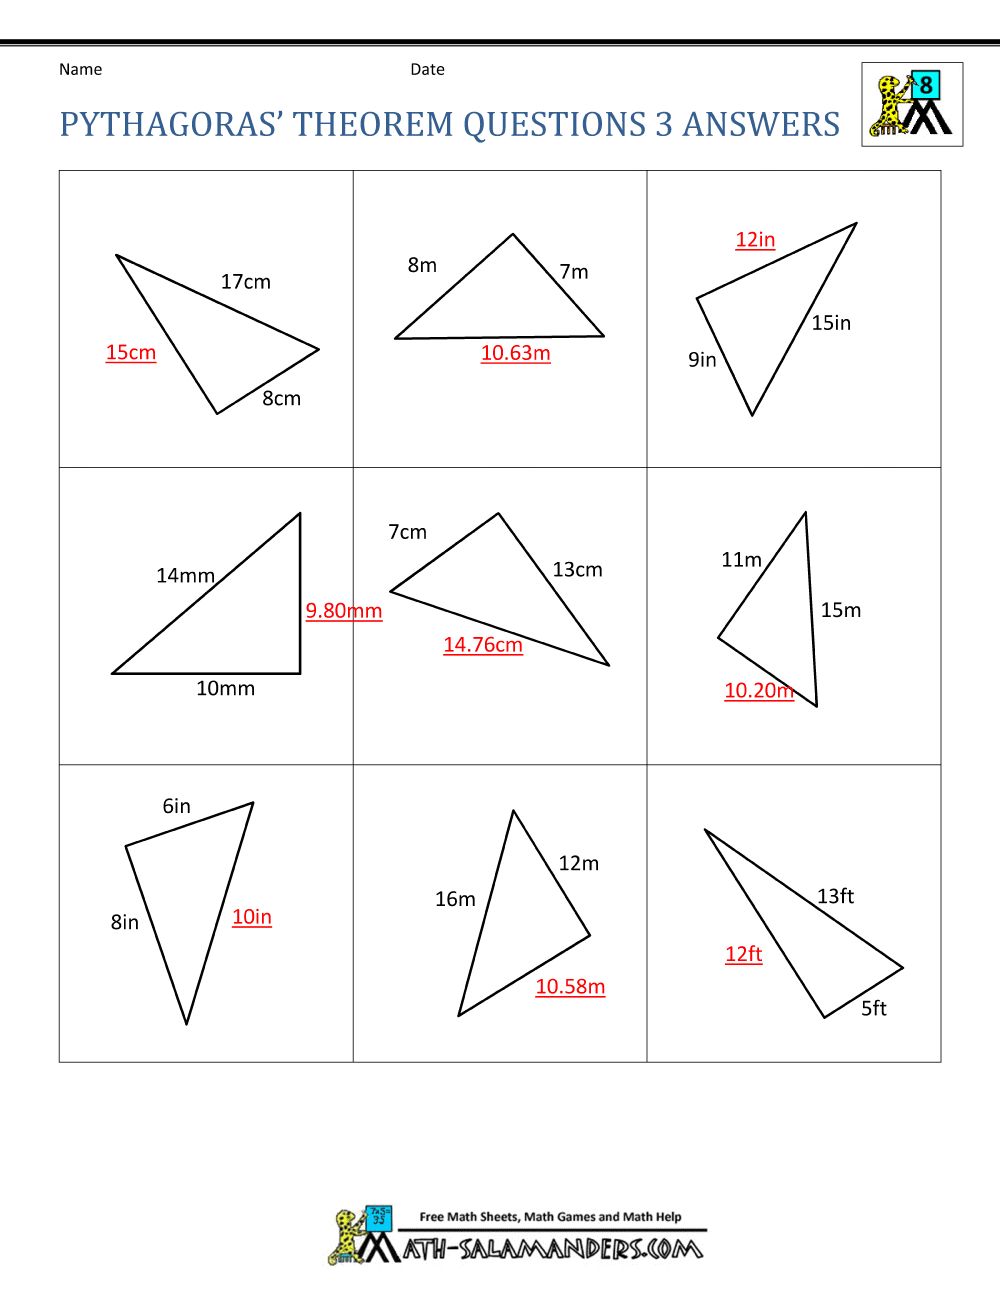 Pythagoras Theorem Questions alphabet worksheets, learning, worksheets for teachers, education, grade worksheets, and worksheets Pythagorean Theorem Word Problems Printable Worksheets 1294 x 1000